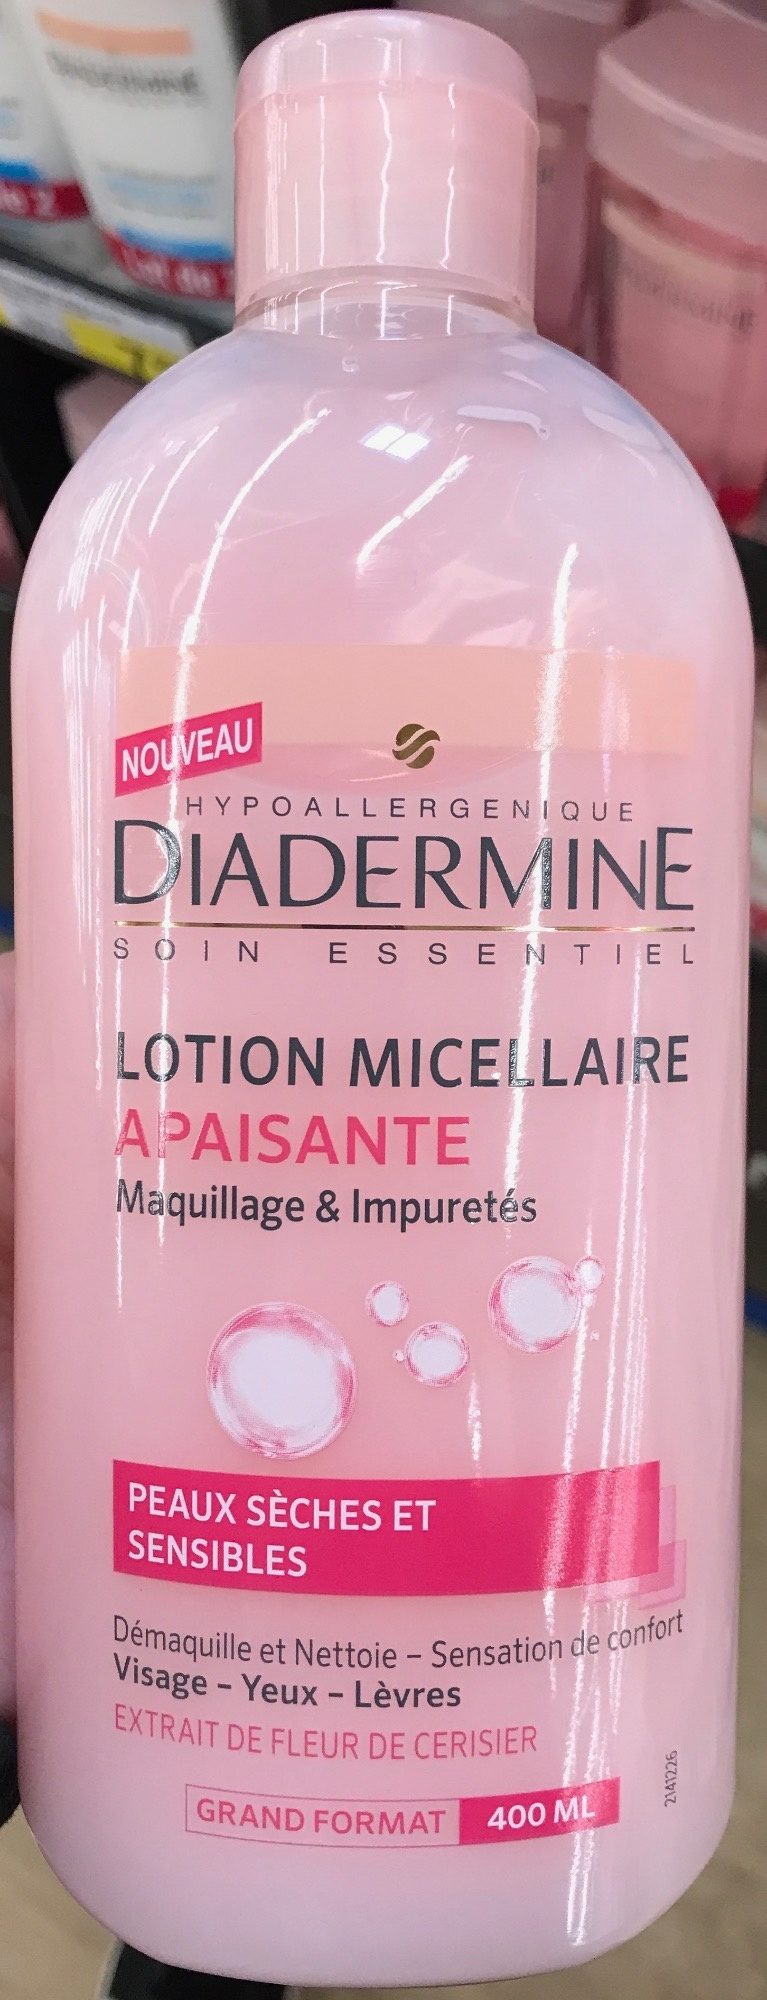 Lotion Micellaire Apaisante - Product - fr